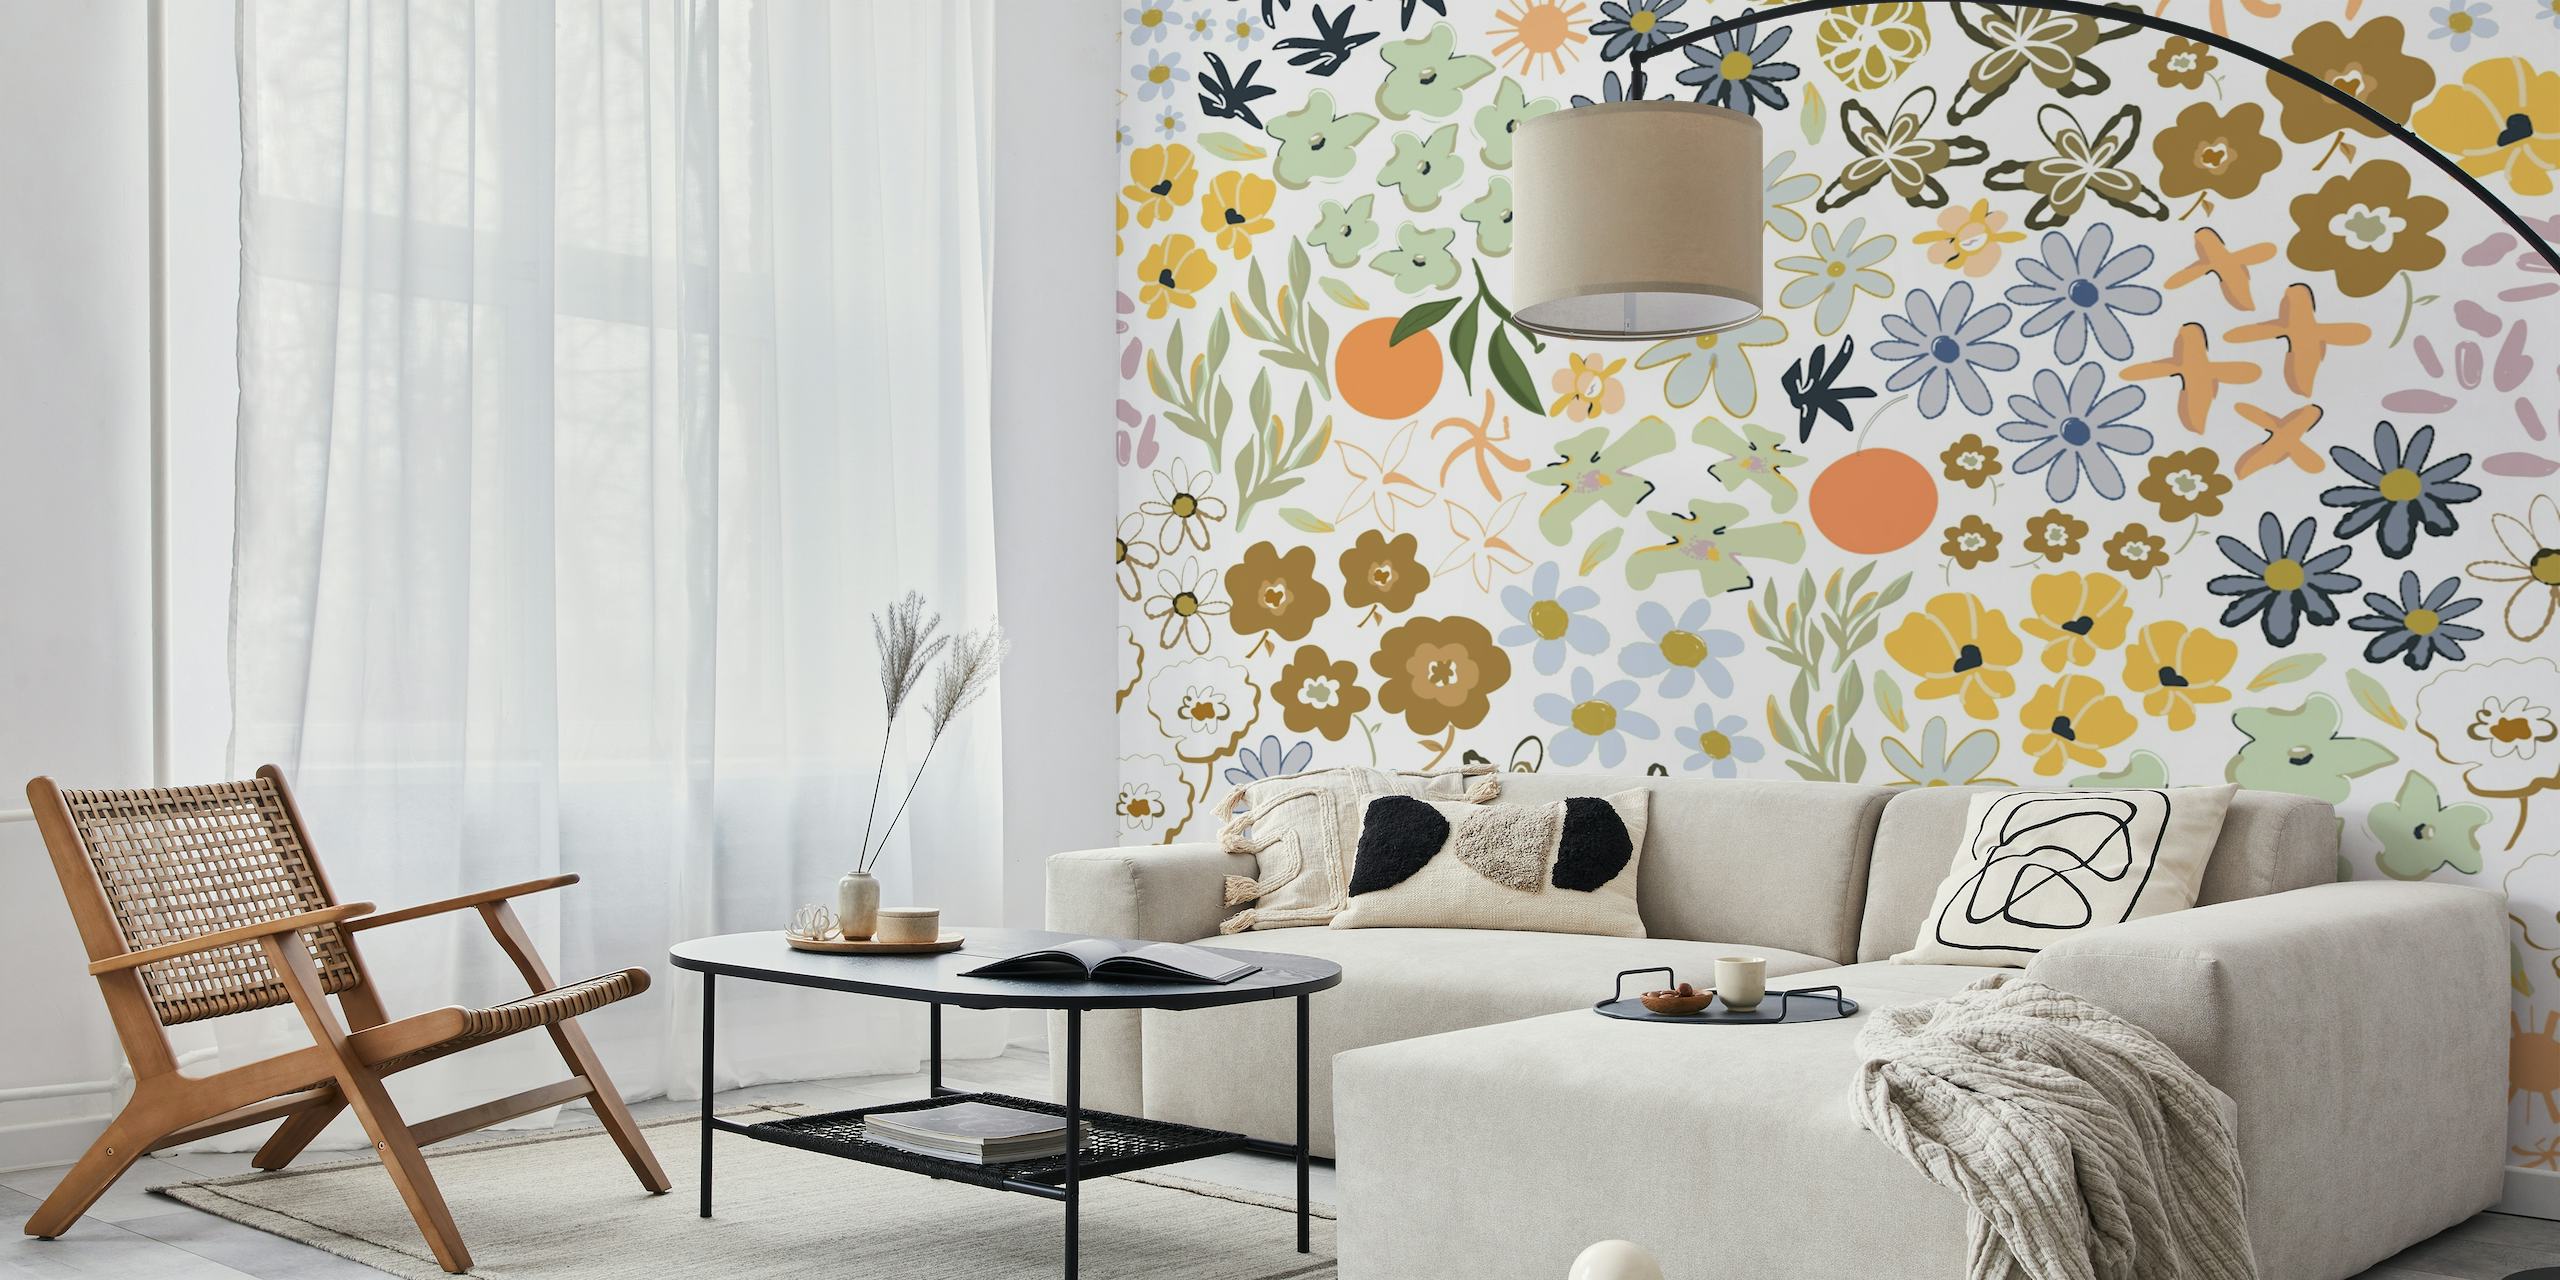 Colorful ditsy floral pattern wall mural with flowers, insects, and fruits